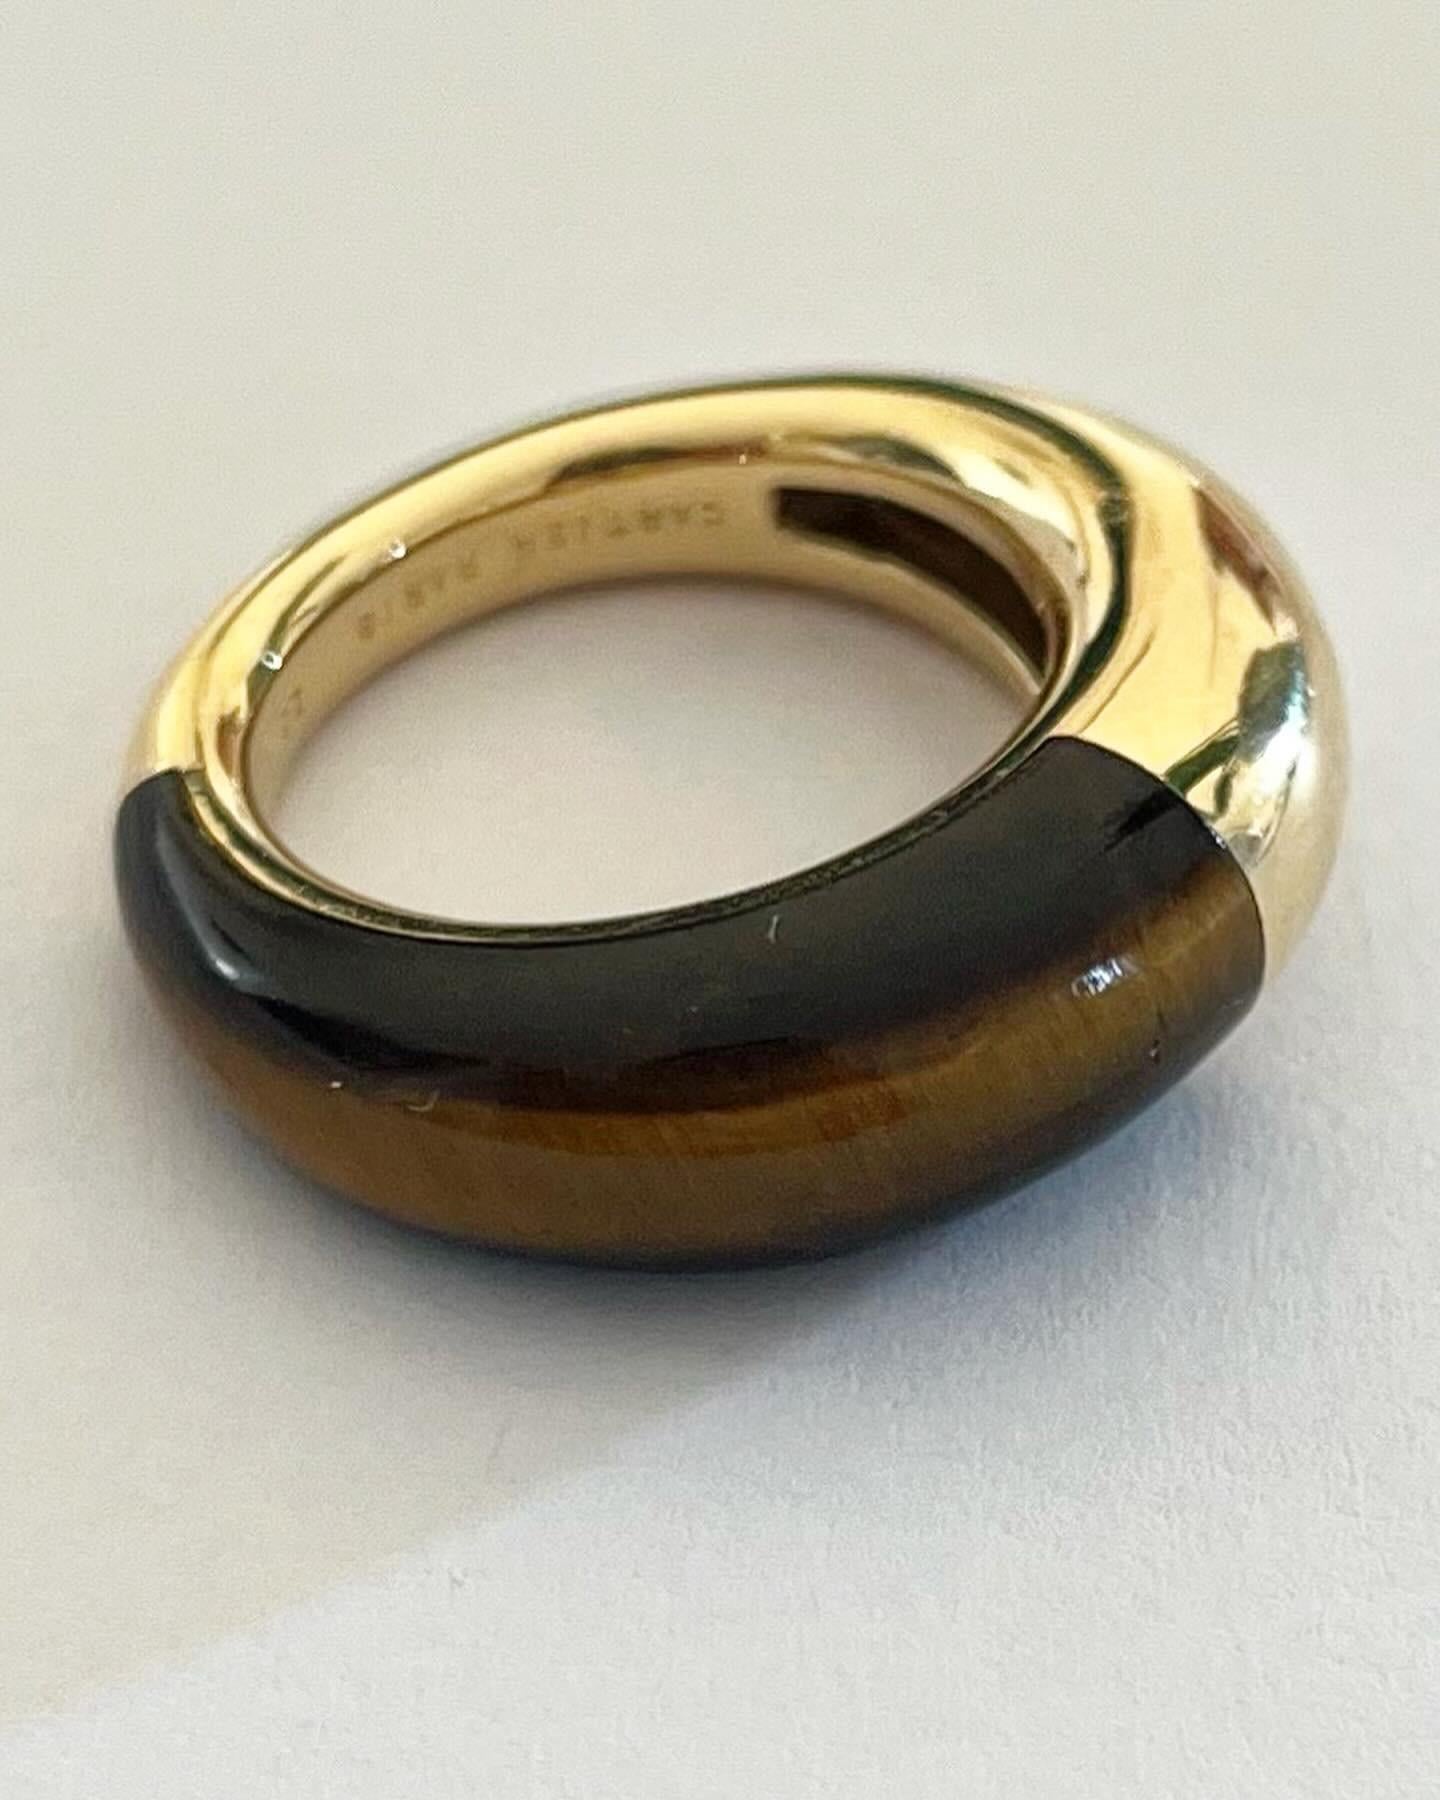 A Modern look that's really the cat's meow, this designer Cartier tiger's eye ring is totally on trend. Sleek high polish yellow gold forms a simple style which is bisected at the top with a tawny toned tiger's eye. Circa 1980 - Stamped Cartier

The